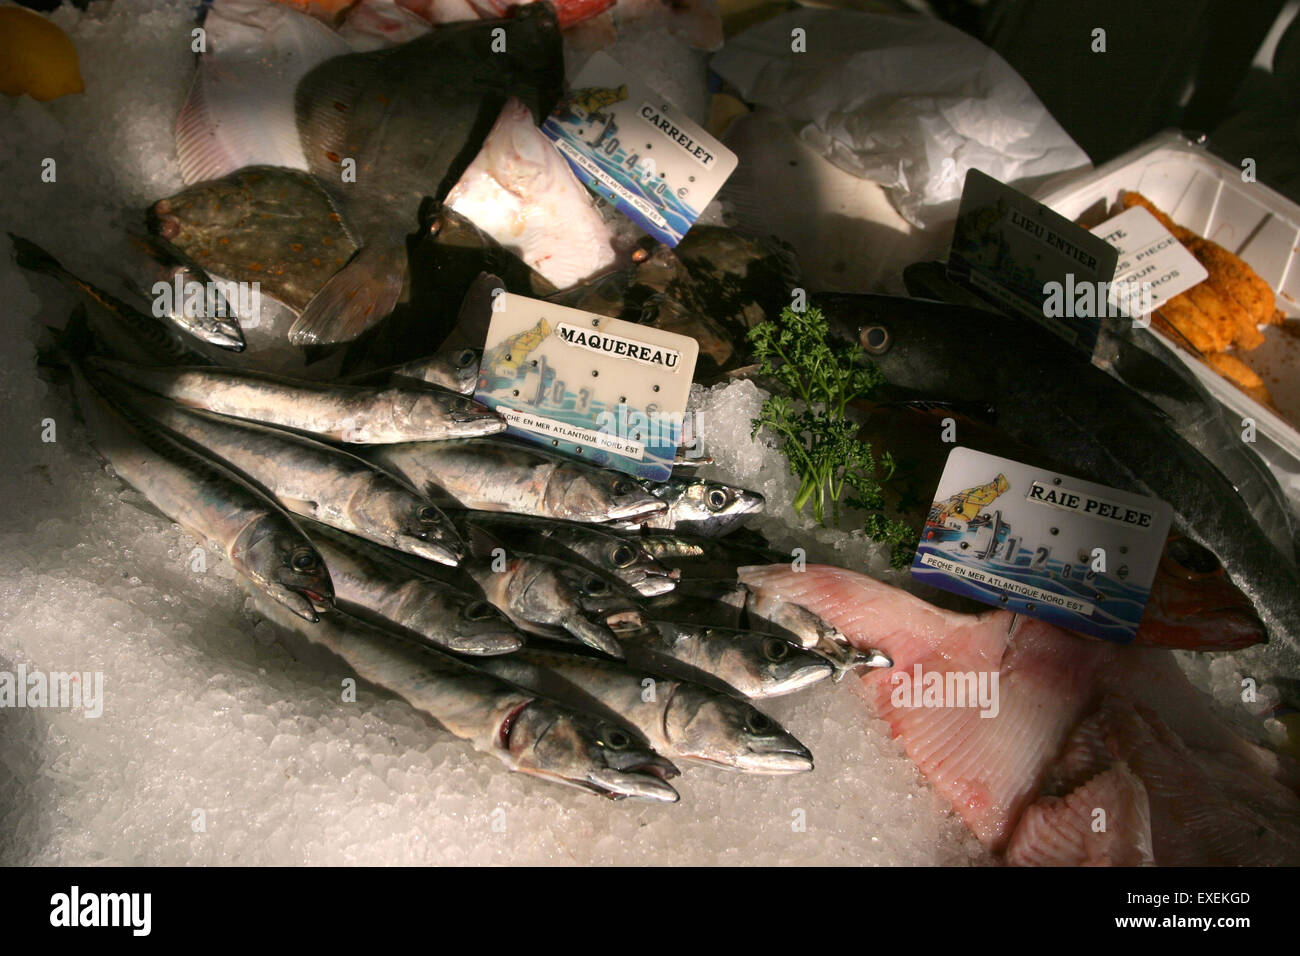 A display of fresh mackerel fish on ice, in a fishmongers market stall in Lille, France. Stock Photo